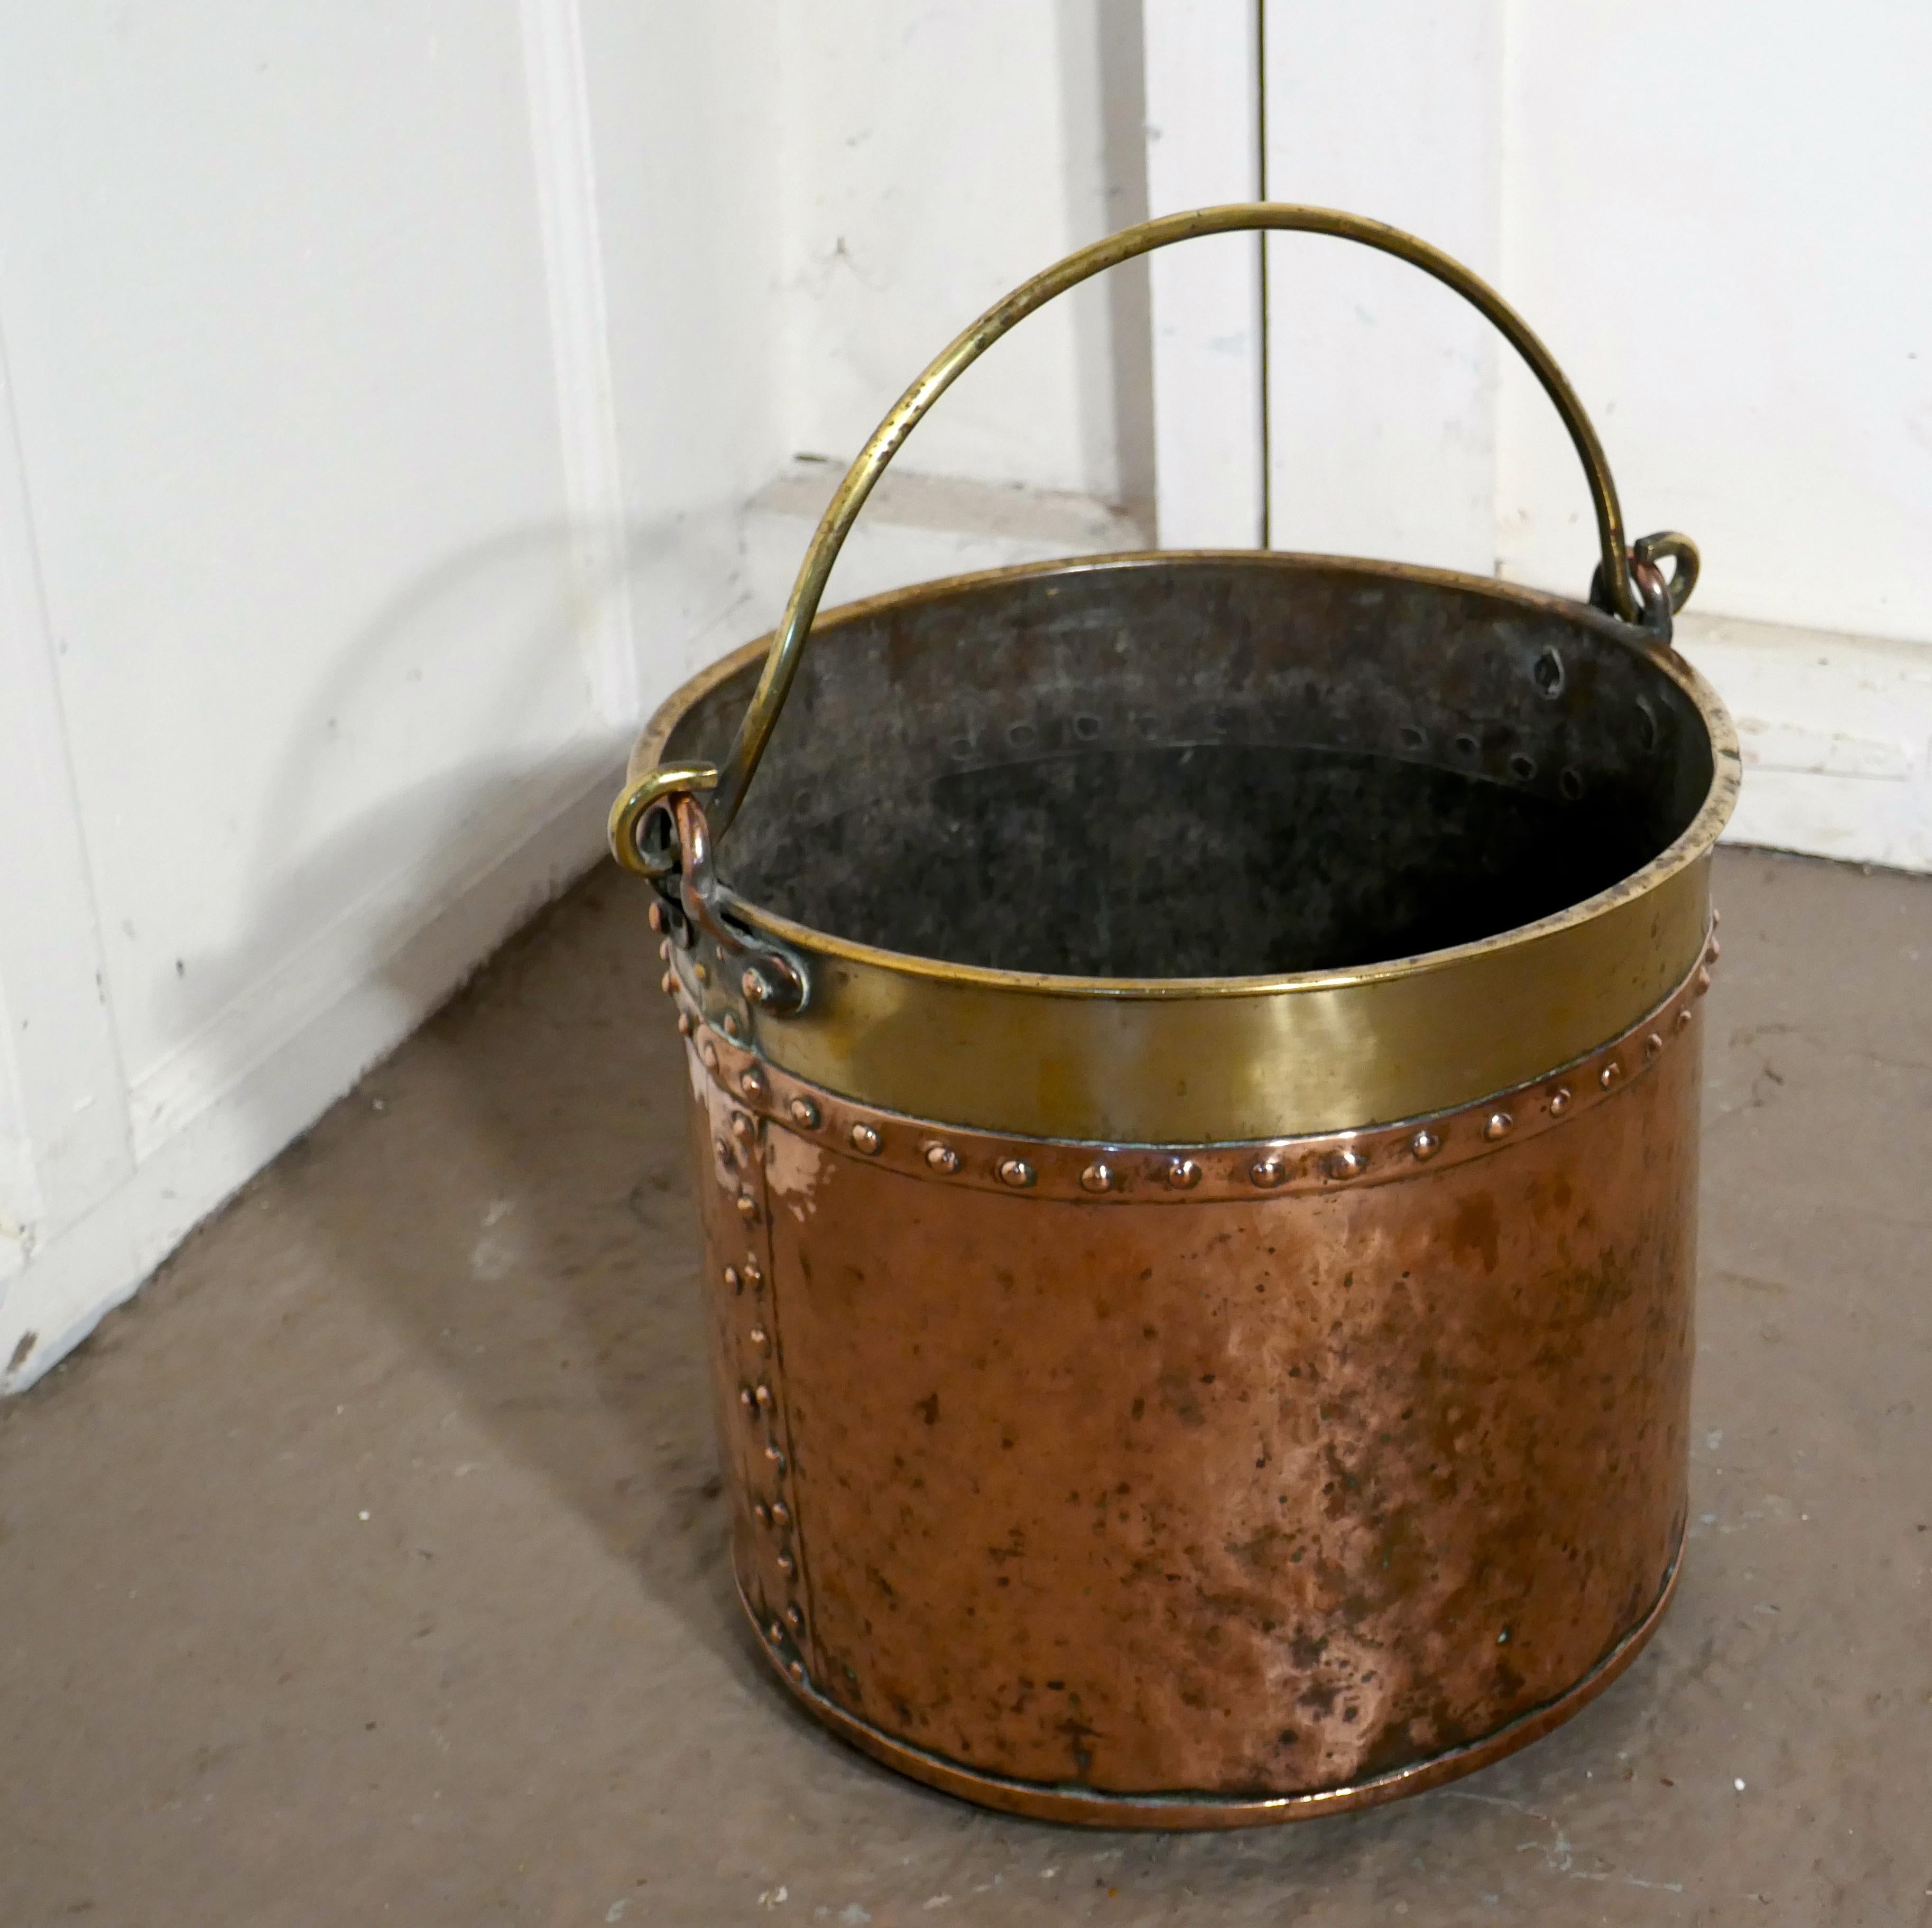 19th century copper and brass coal or log bucket

This is a lovely looking 19th century bucket it has a riveted base and circumference The bucket has a rolled top and the brass handle swings through 180 degrees
It is in very good sound with the